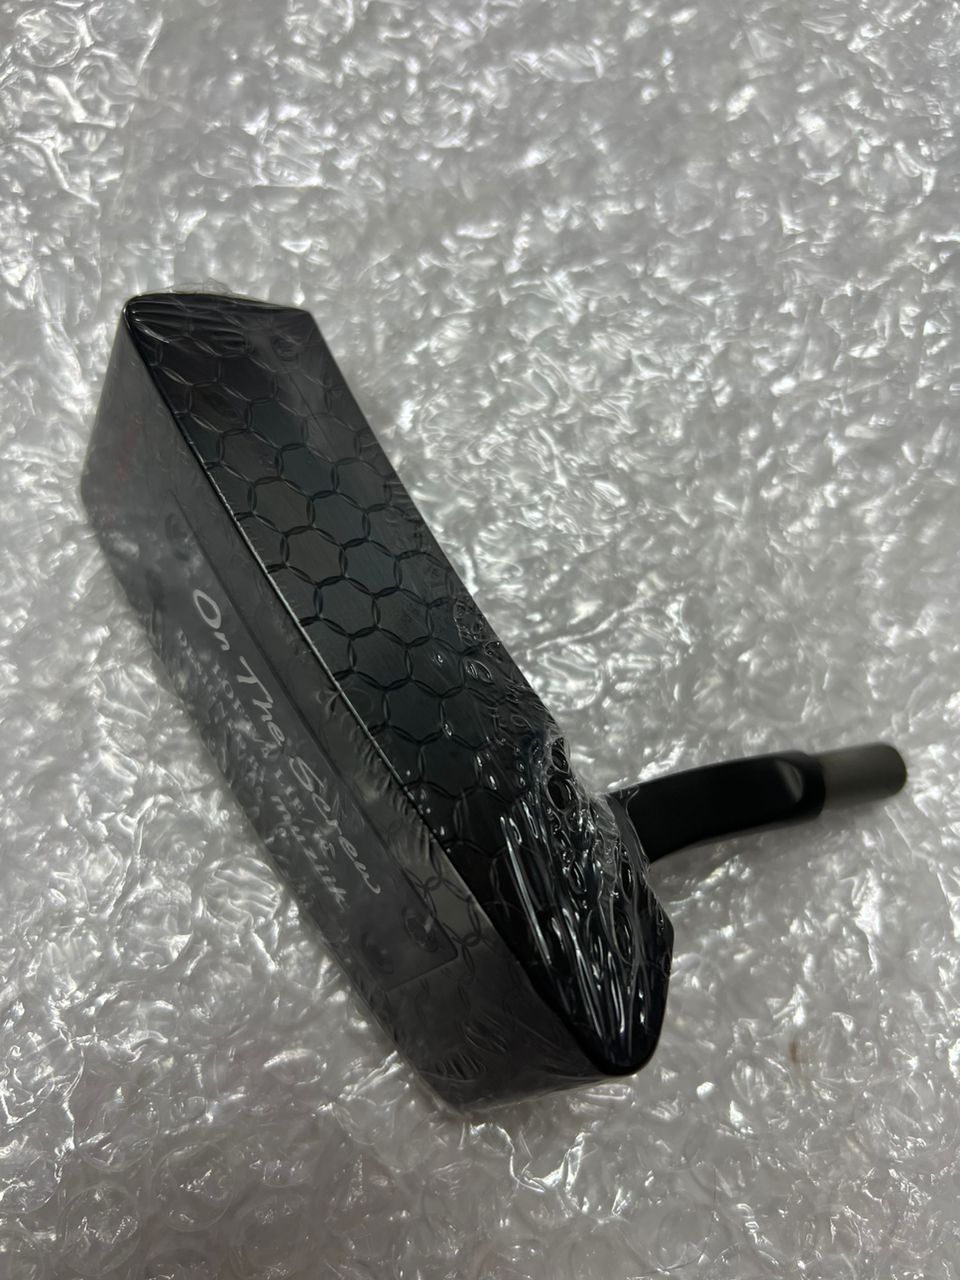 MUZIIK 6221 BLACK PUTTER (HEAD ONLY) - LIMITED EDITION